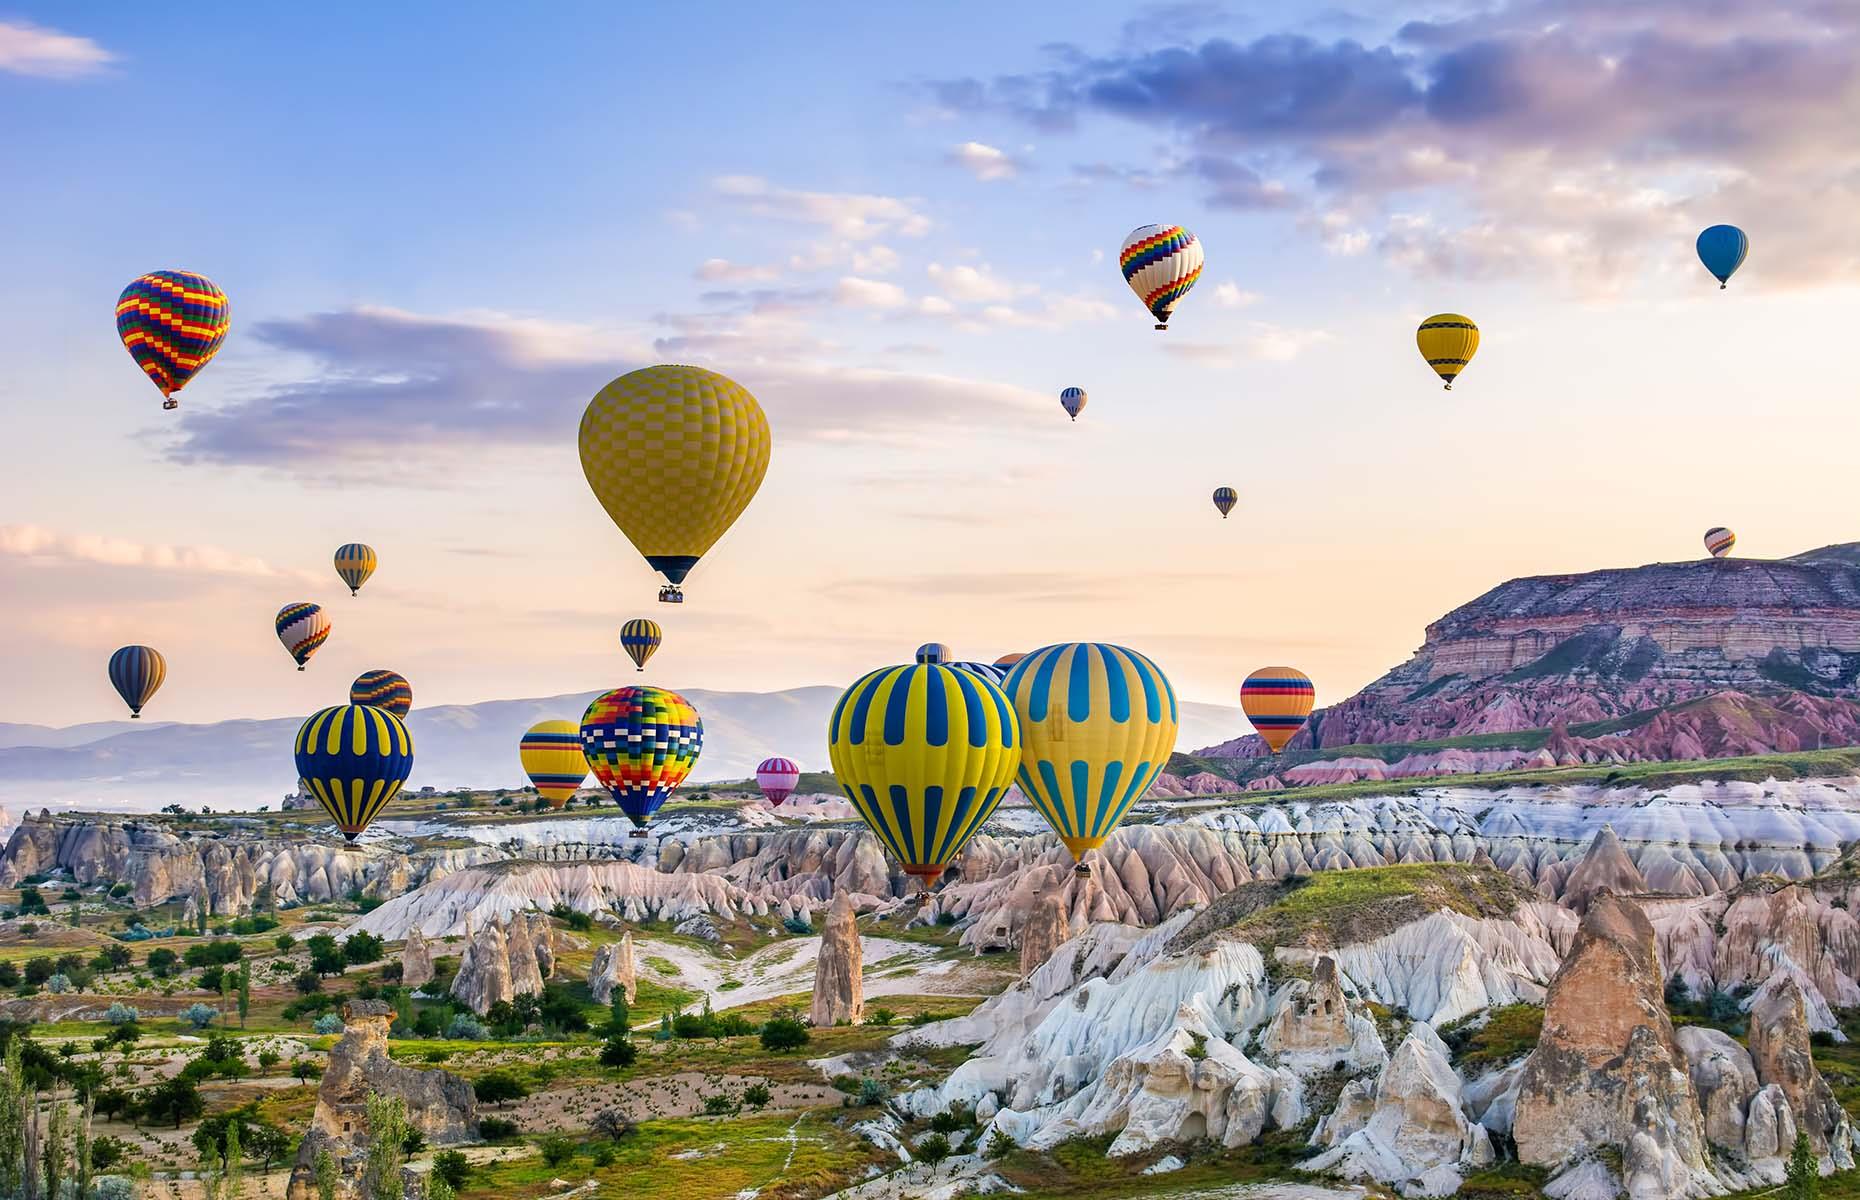 A group of brightly-coloured hot air balloons are seen here gliding over the historic landscape of Cappadocia in central Turkey. The unique rock formations in this region have been shaped by erosion and volcanic activity, and are known as fairy chimneys. Thanks to the unusual landscape below, Cappadocia is a popular destination for hot air balloon enthusiasts as well as those who wish to marvel at the rocks from above.